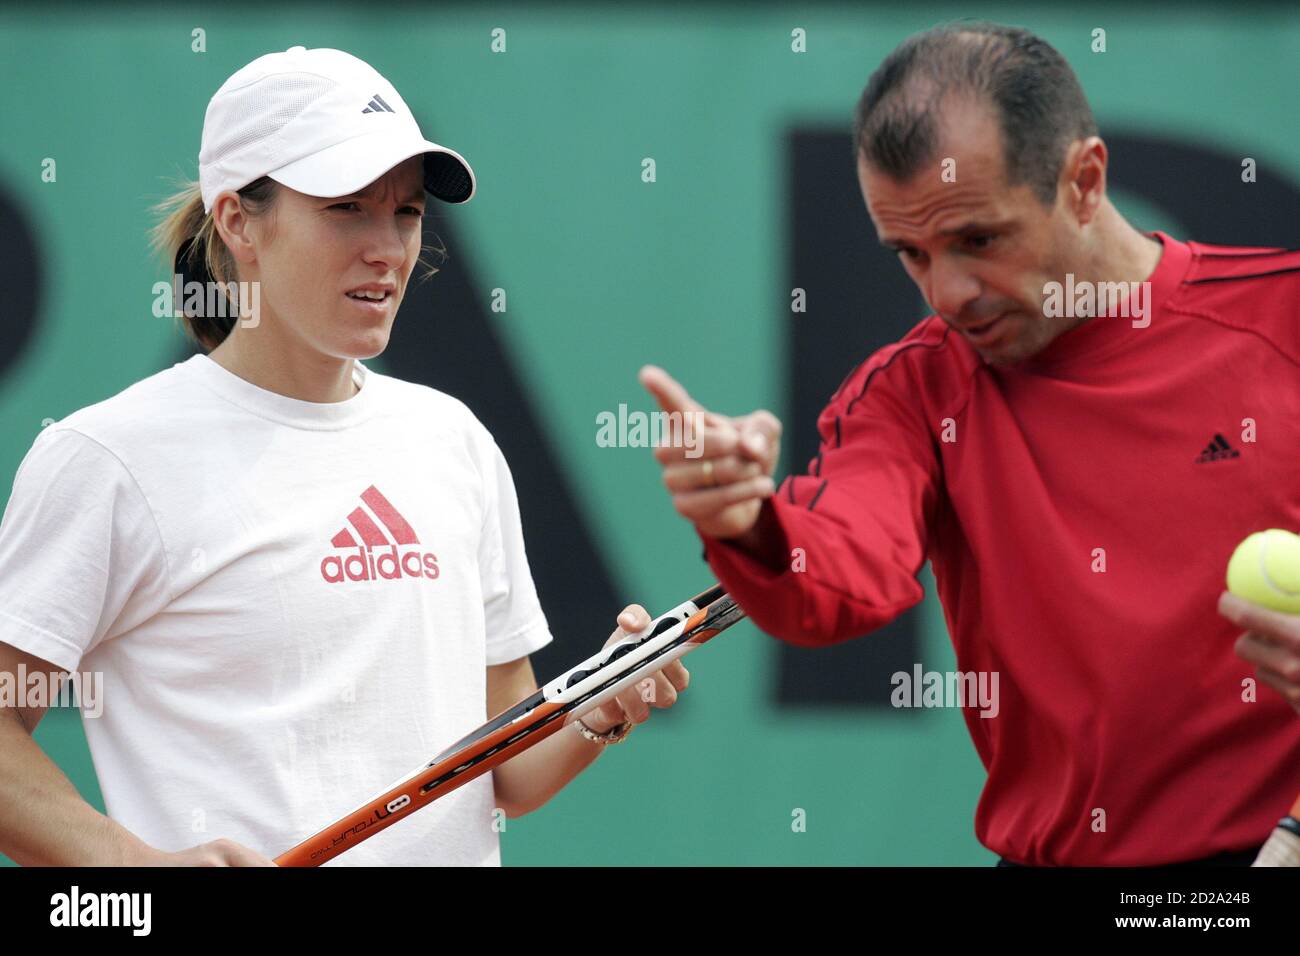 Justine Henin-Hardenne (L) of Belgium listens to her coach Carlos Rodriguez  during a training session ahead of the French Open tennis tournament at the  Roland Garros stadium in Paris, May 26, 2006.